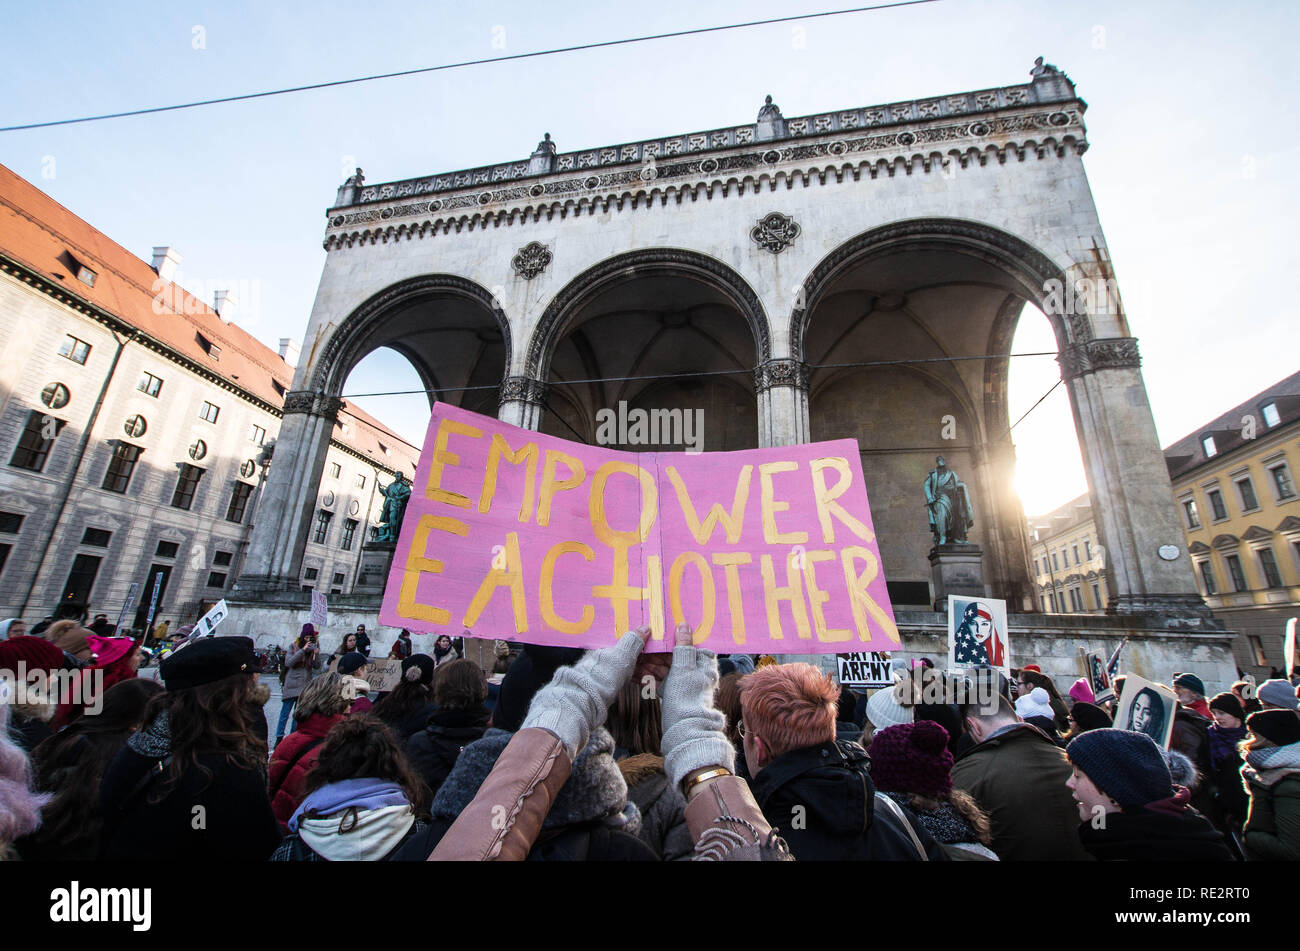 Munich, Bavaria, Germany. 19th Jan, 2019. Two years after the original Women's March, over 250 marched through the streets of Munich to raise awareness of the issues women face in modern western societies. Organized by the ex-pat group Democrats Abroad, the demonstrators sought to show solidarity with marches in some thirty countries around the world. Credit: Sachelle Babbar/ZUMA Wire/Alamy Live News Stock Photo